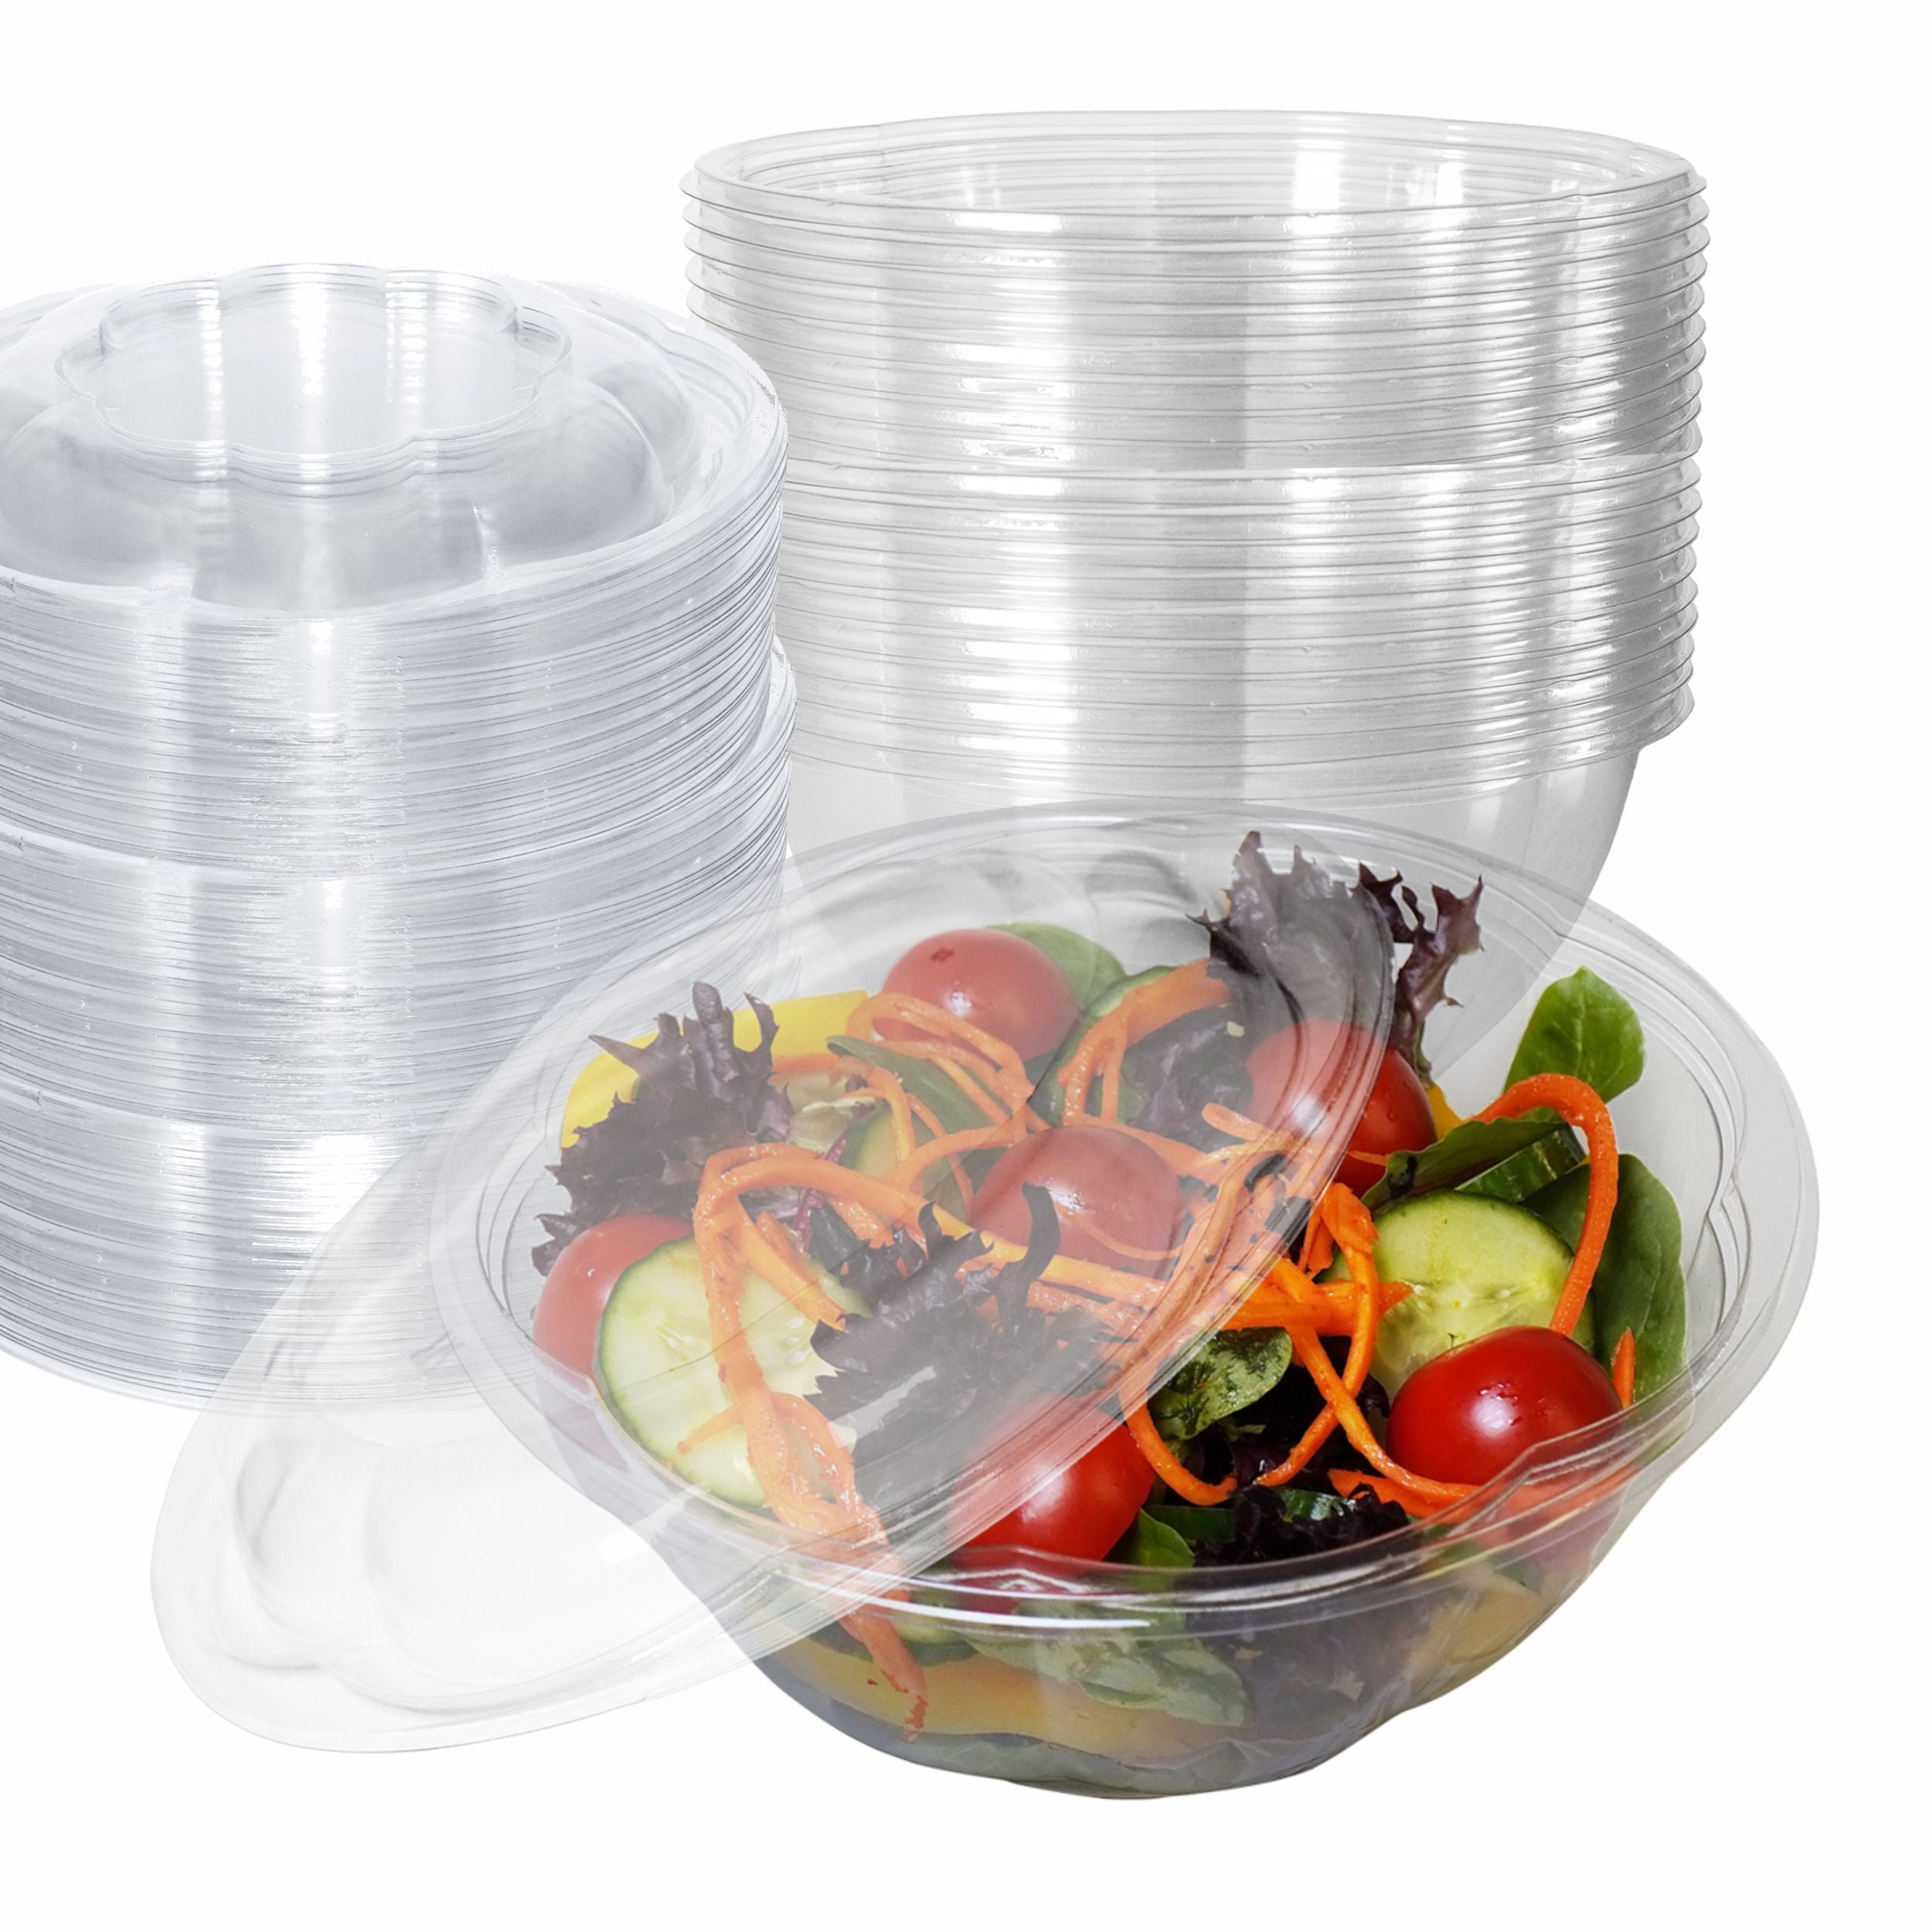 64 oz Container Perforated Removable Flat Lid (200 Pack)